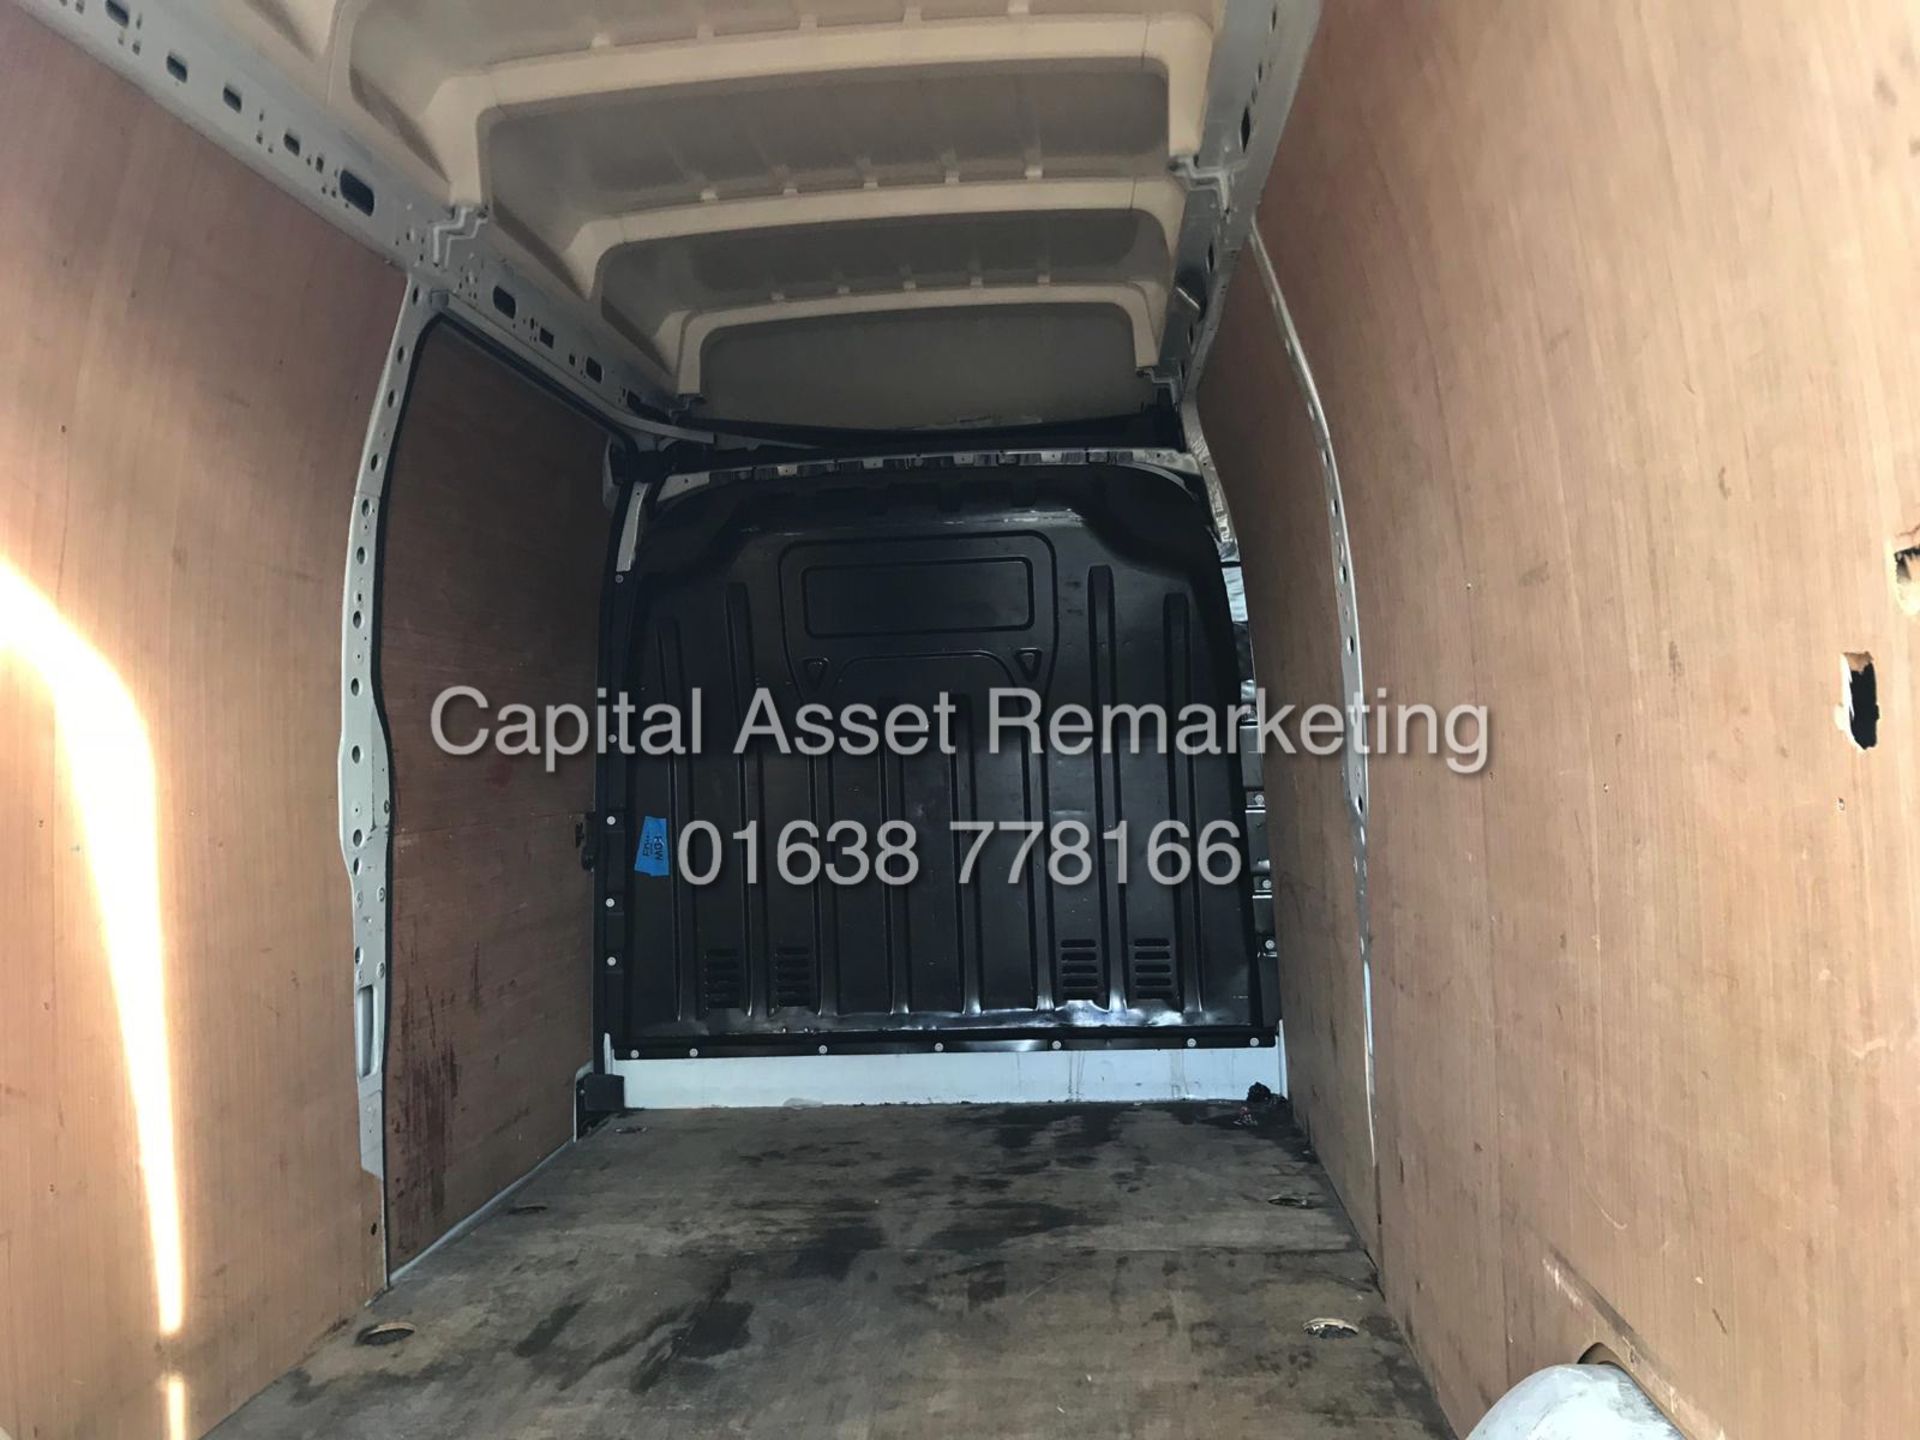 RENAULT MASTER 2.3DCI "BUSINESS EDITION" LH35 LWB/EXTRA HI TOP (2016 MODEL) HORSE BOX CONVERSION ? - Image 13 of 15